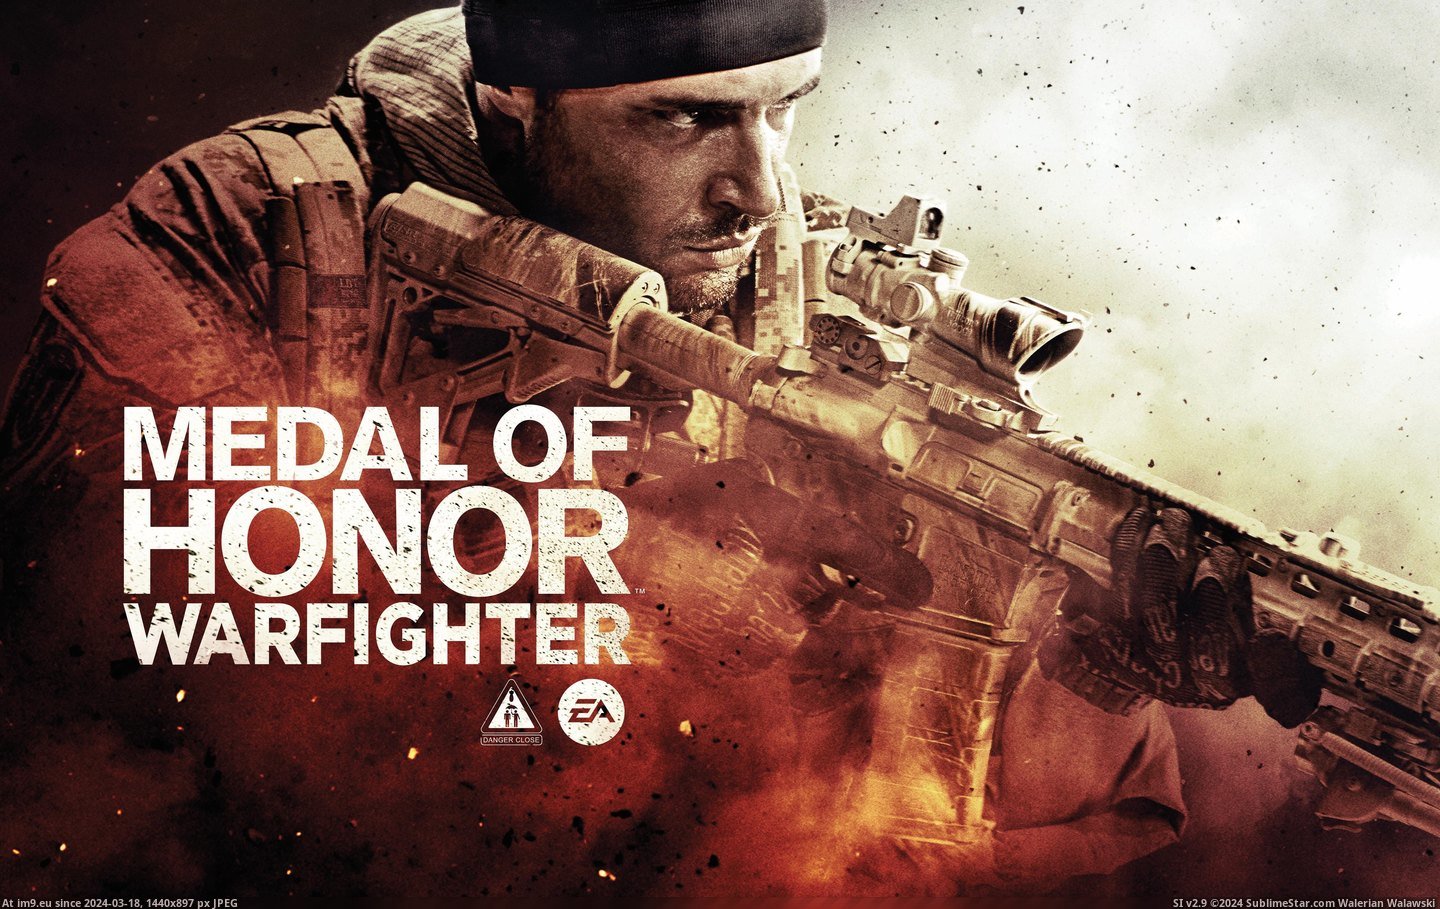 #Wallpaper #Wide #Warfighter #Honor #Medal Medal Of Honor Warfighter Wide HD Wallpaper Pic. (Изображение из альбом Unique HD Wallpapers))